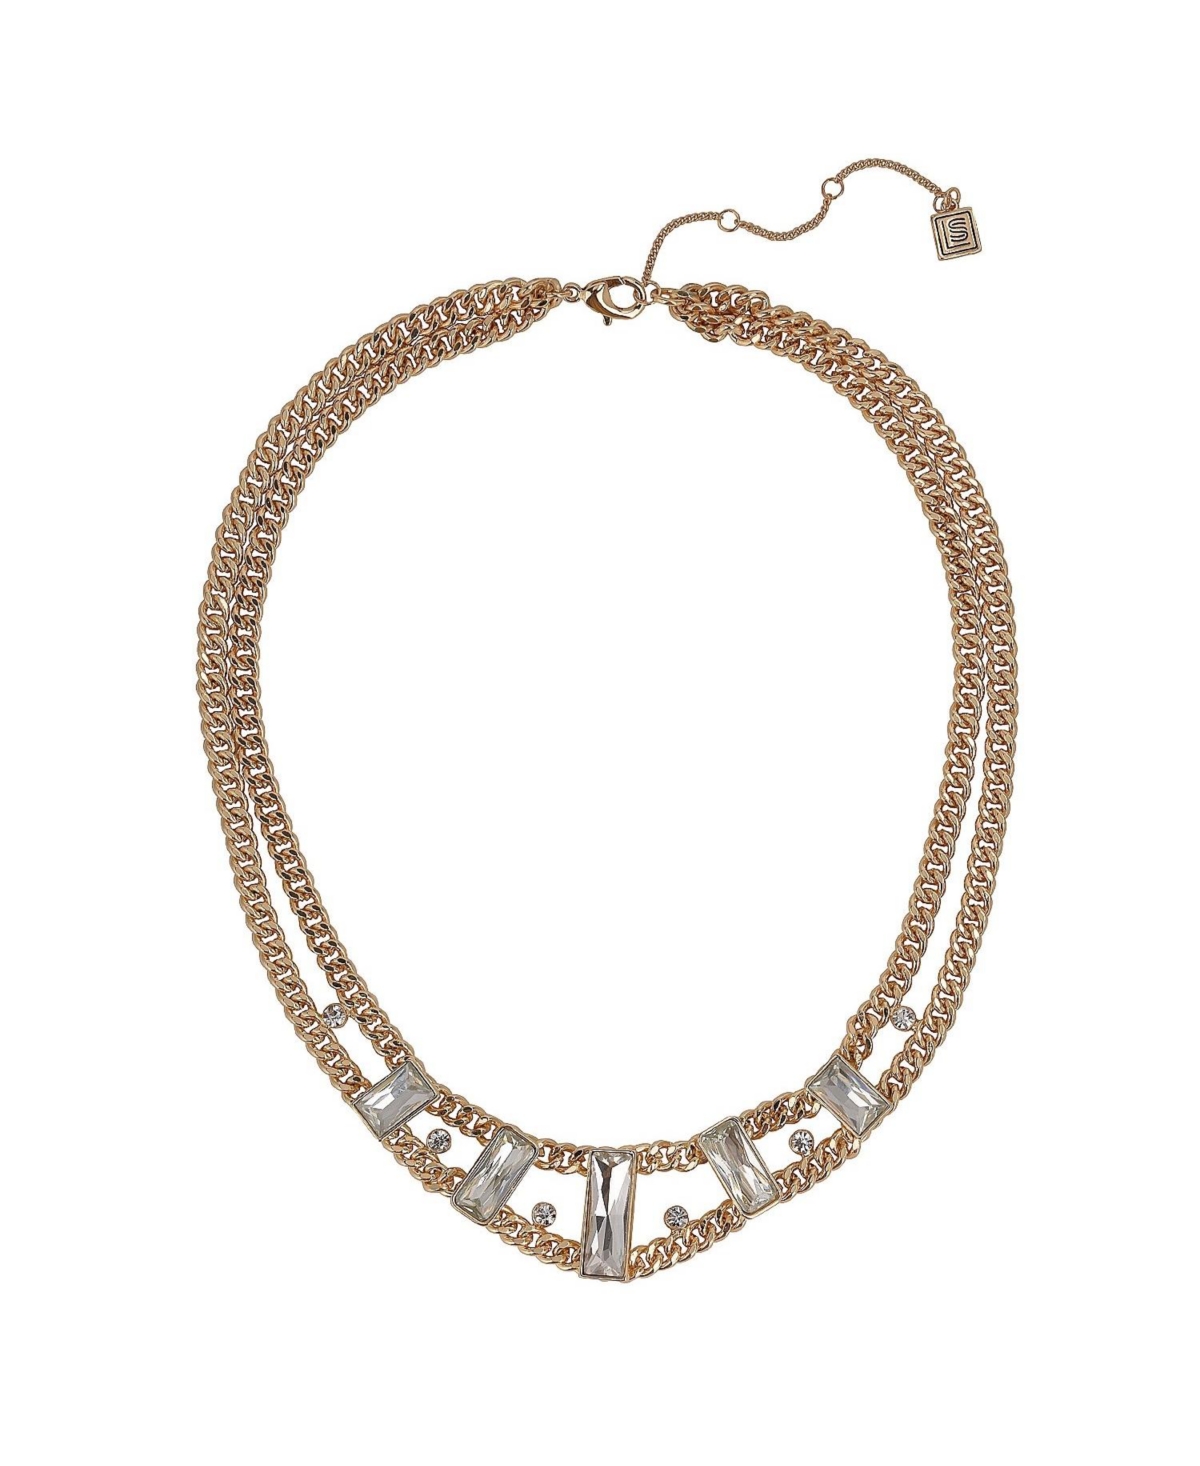 Gold Tone Chain Collar Necklace with Baguette Stones - Gold